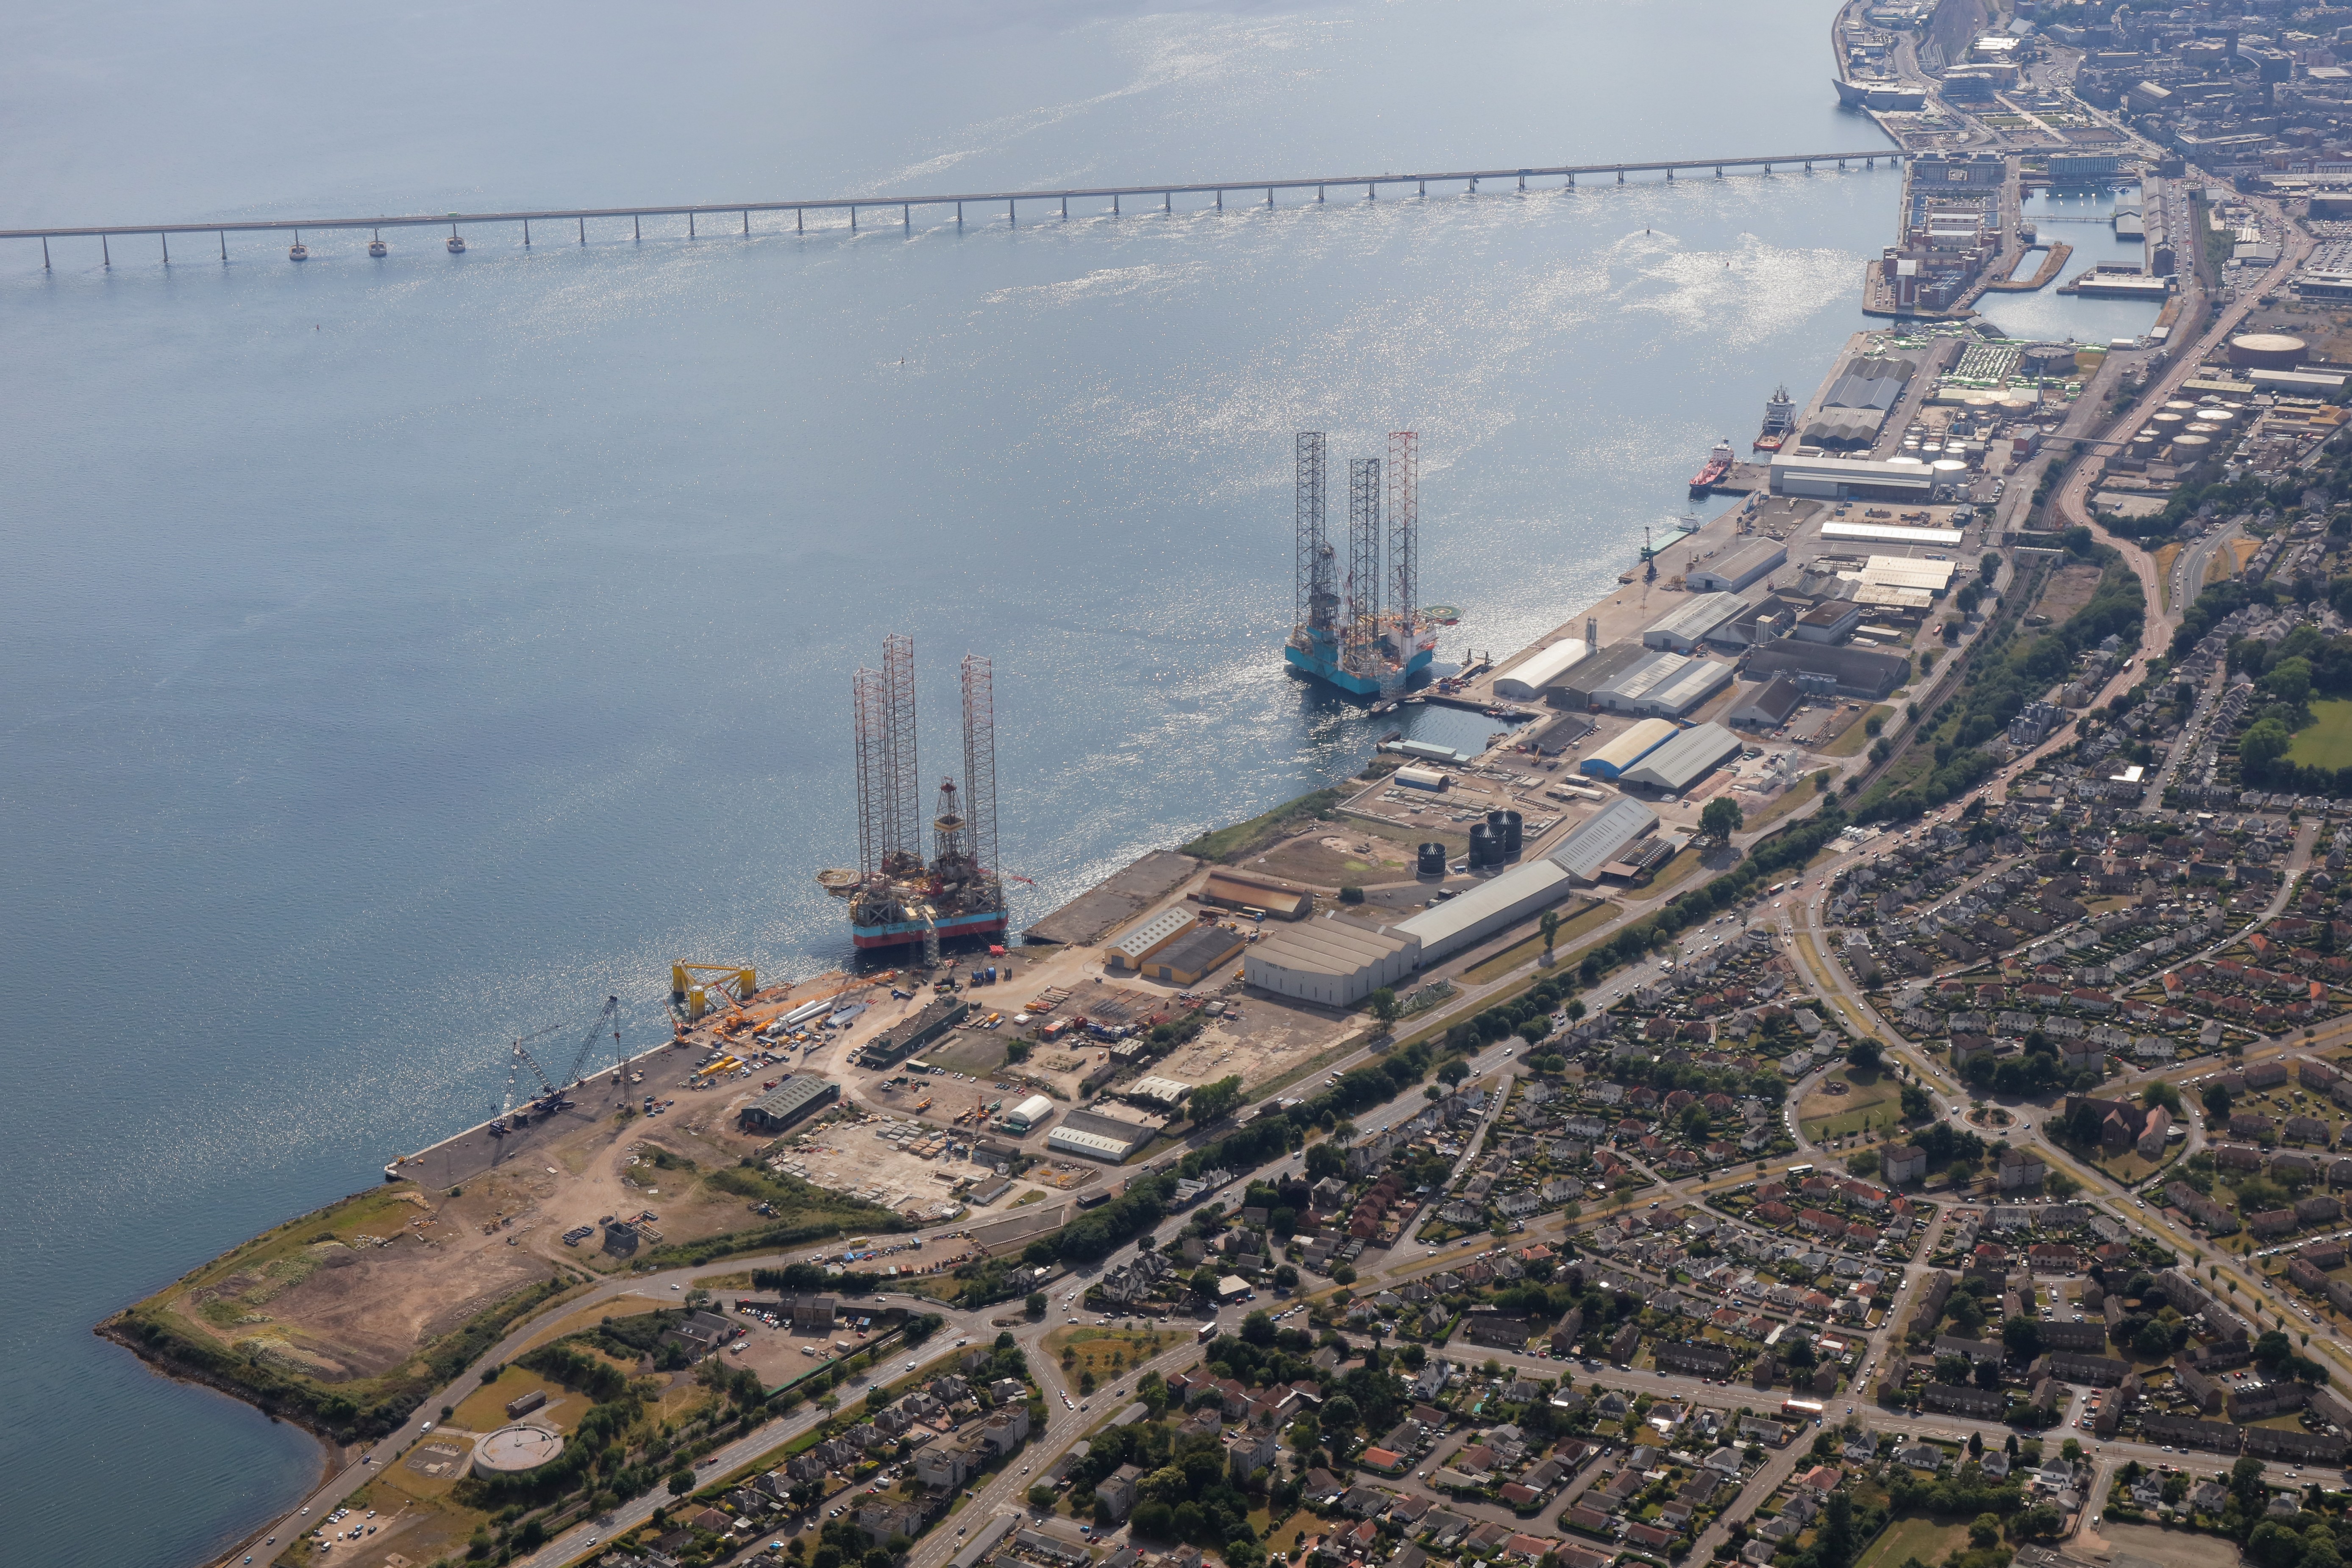 Aerial view of the Port of Dundee